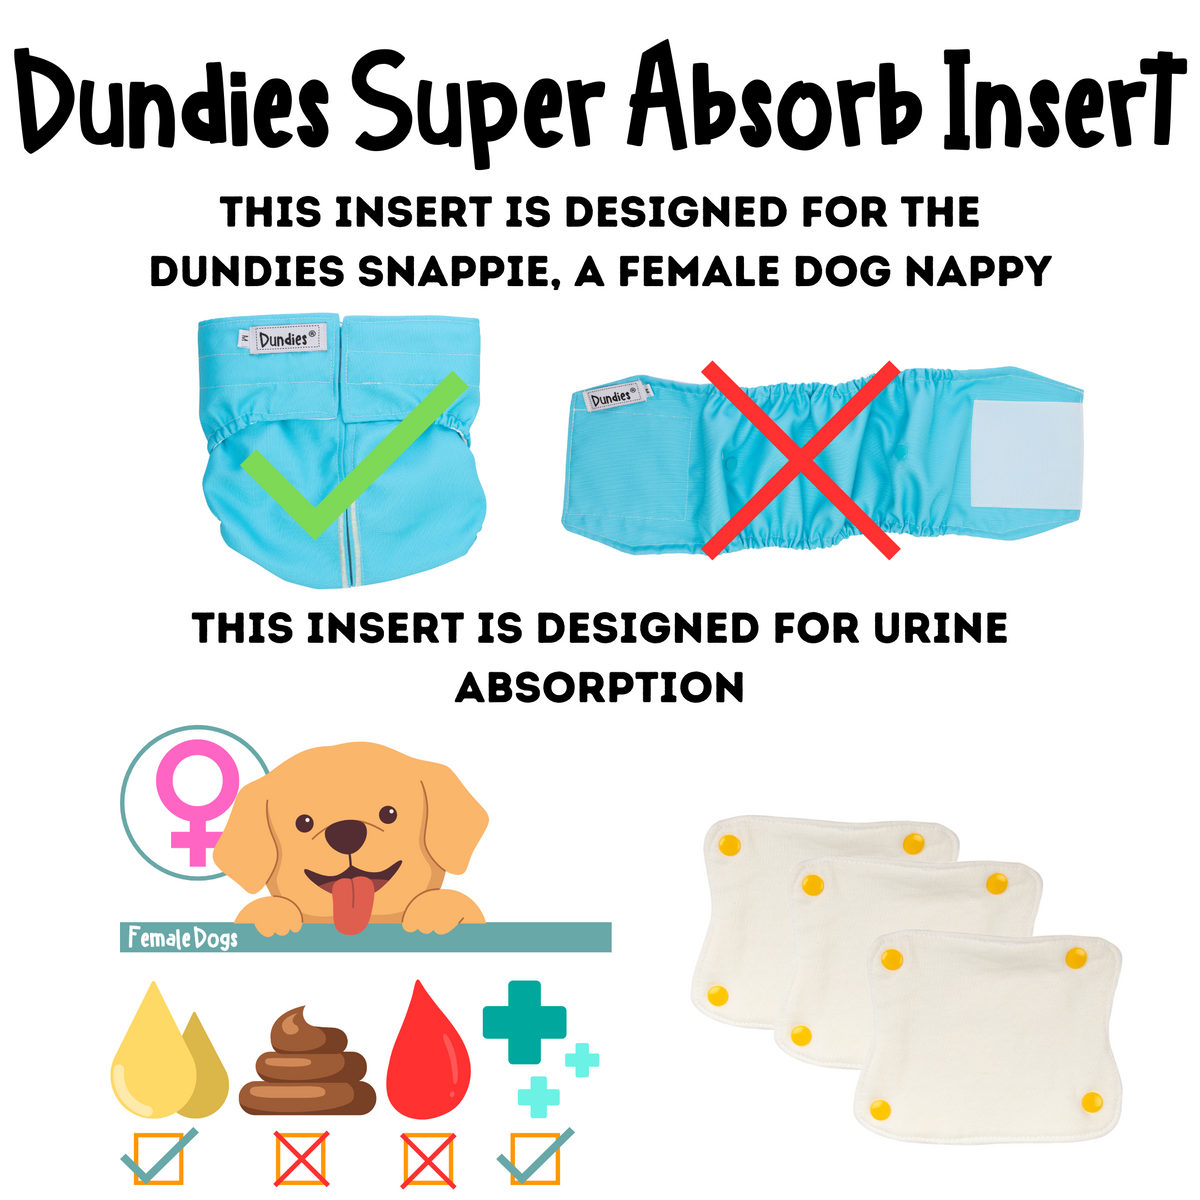 Dundies Snappies Super Bamboo Insert 3 pack (Light Incontinence)